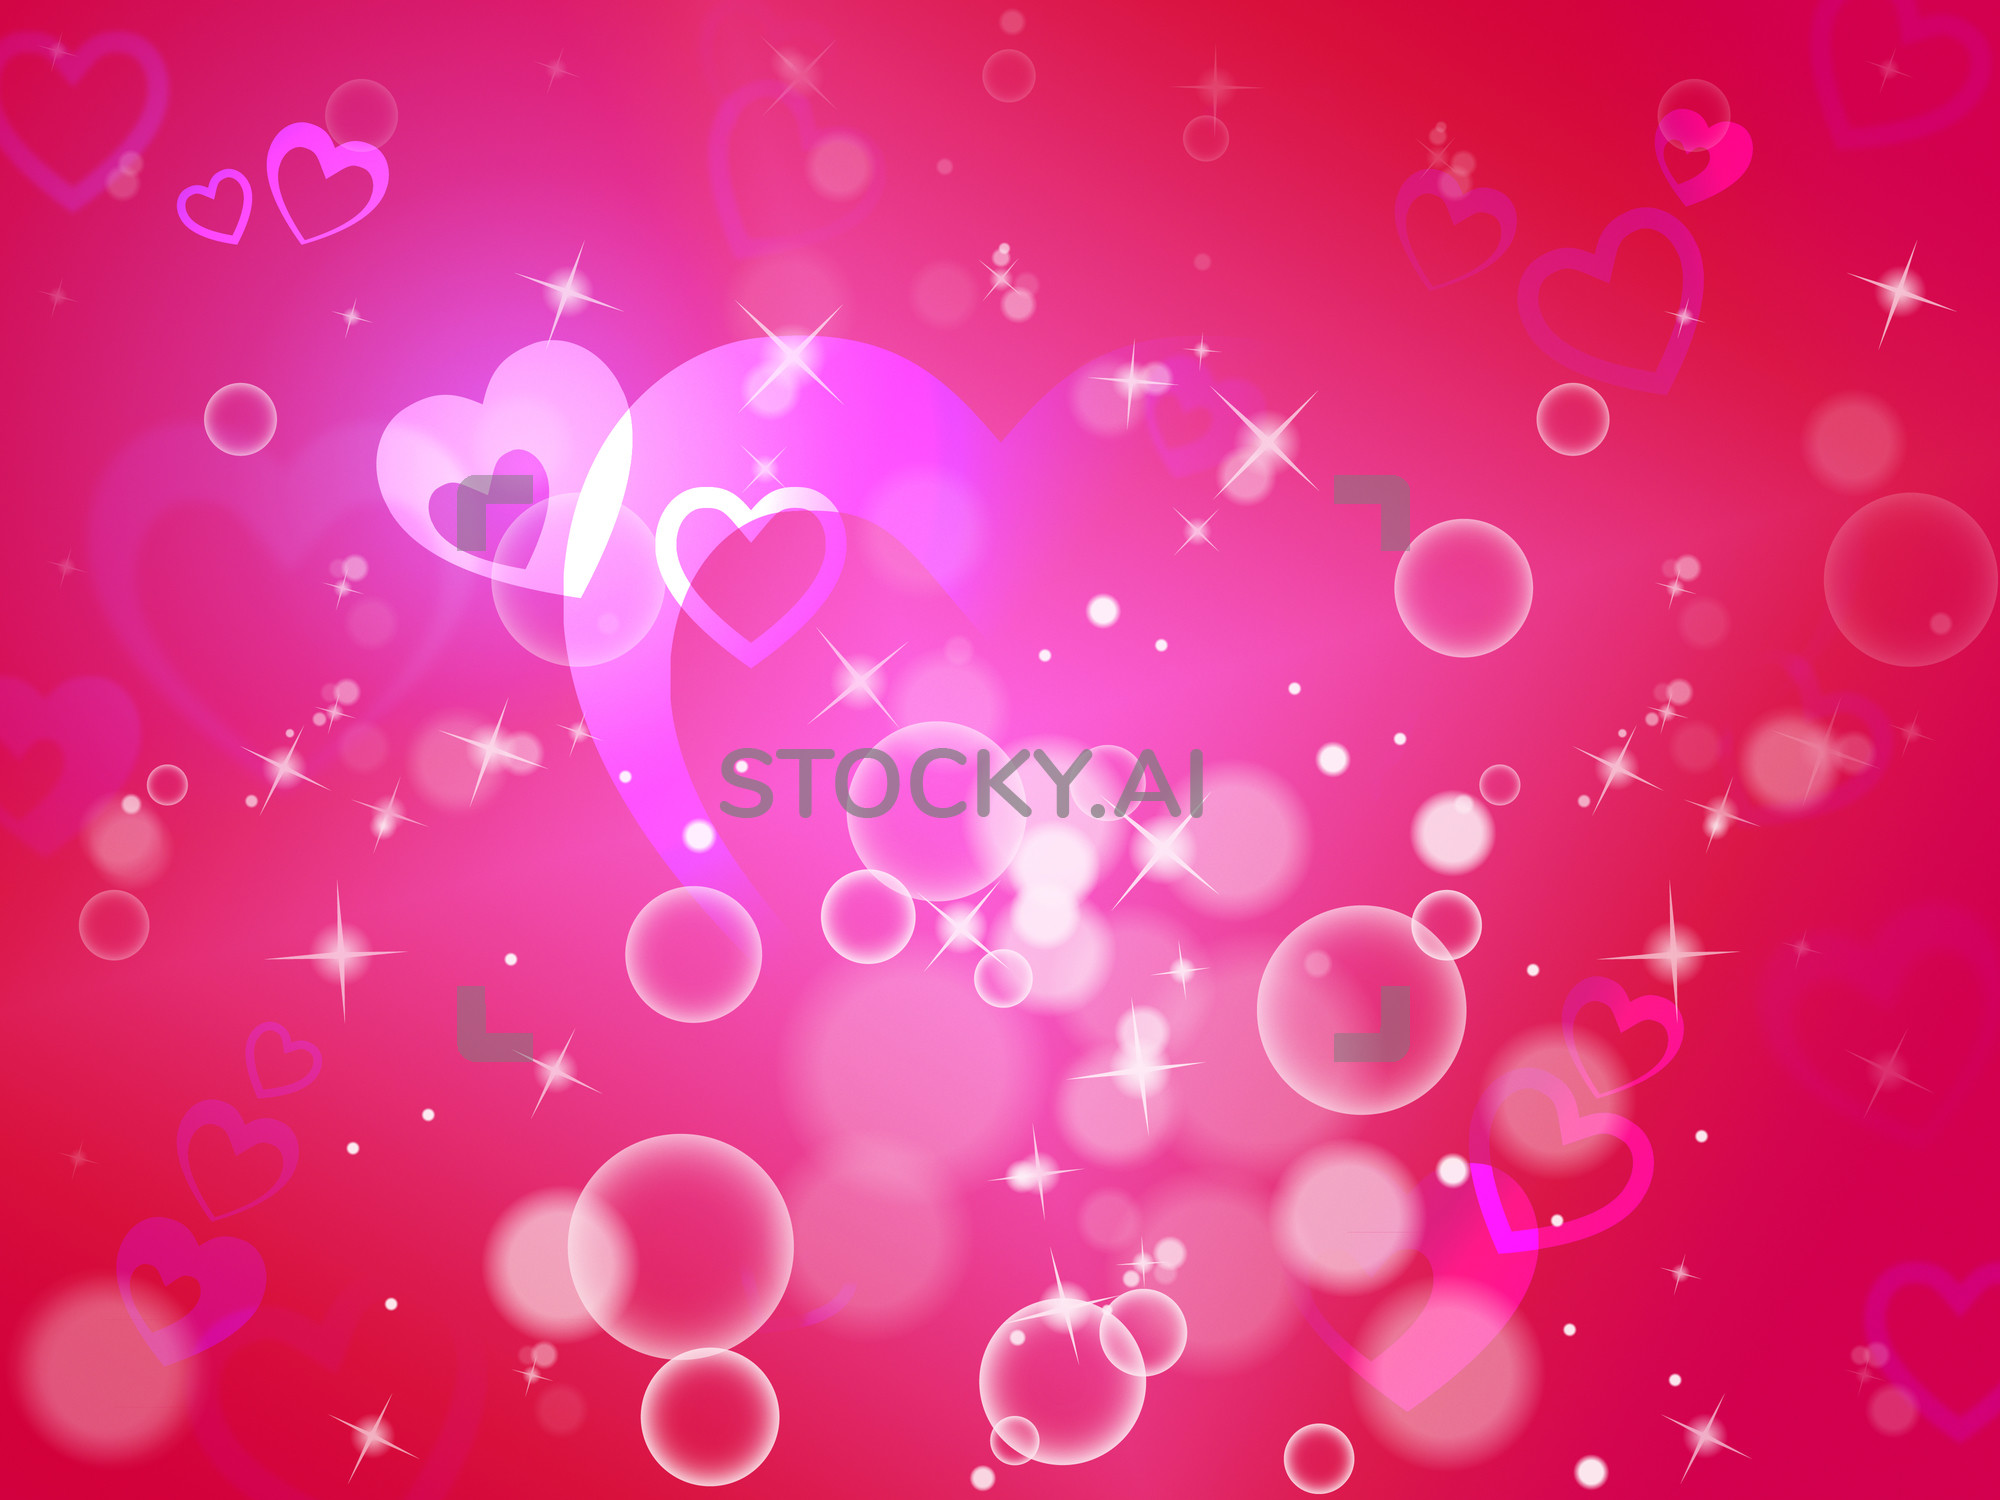 2000x1500 Image of Hearts Background Means Shiny Hearts Wallpaper Or Romanticism